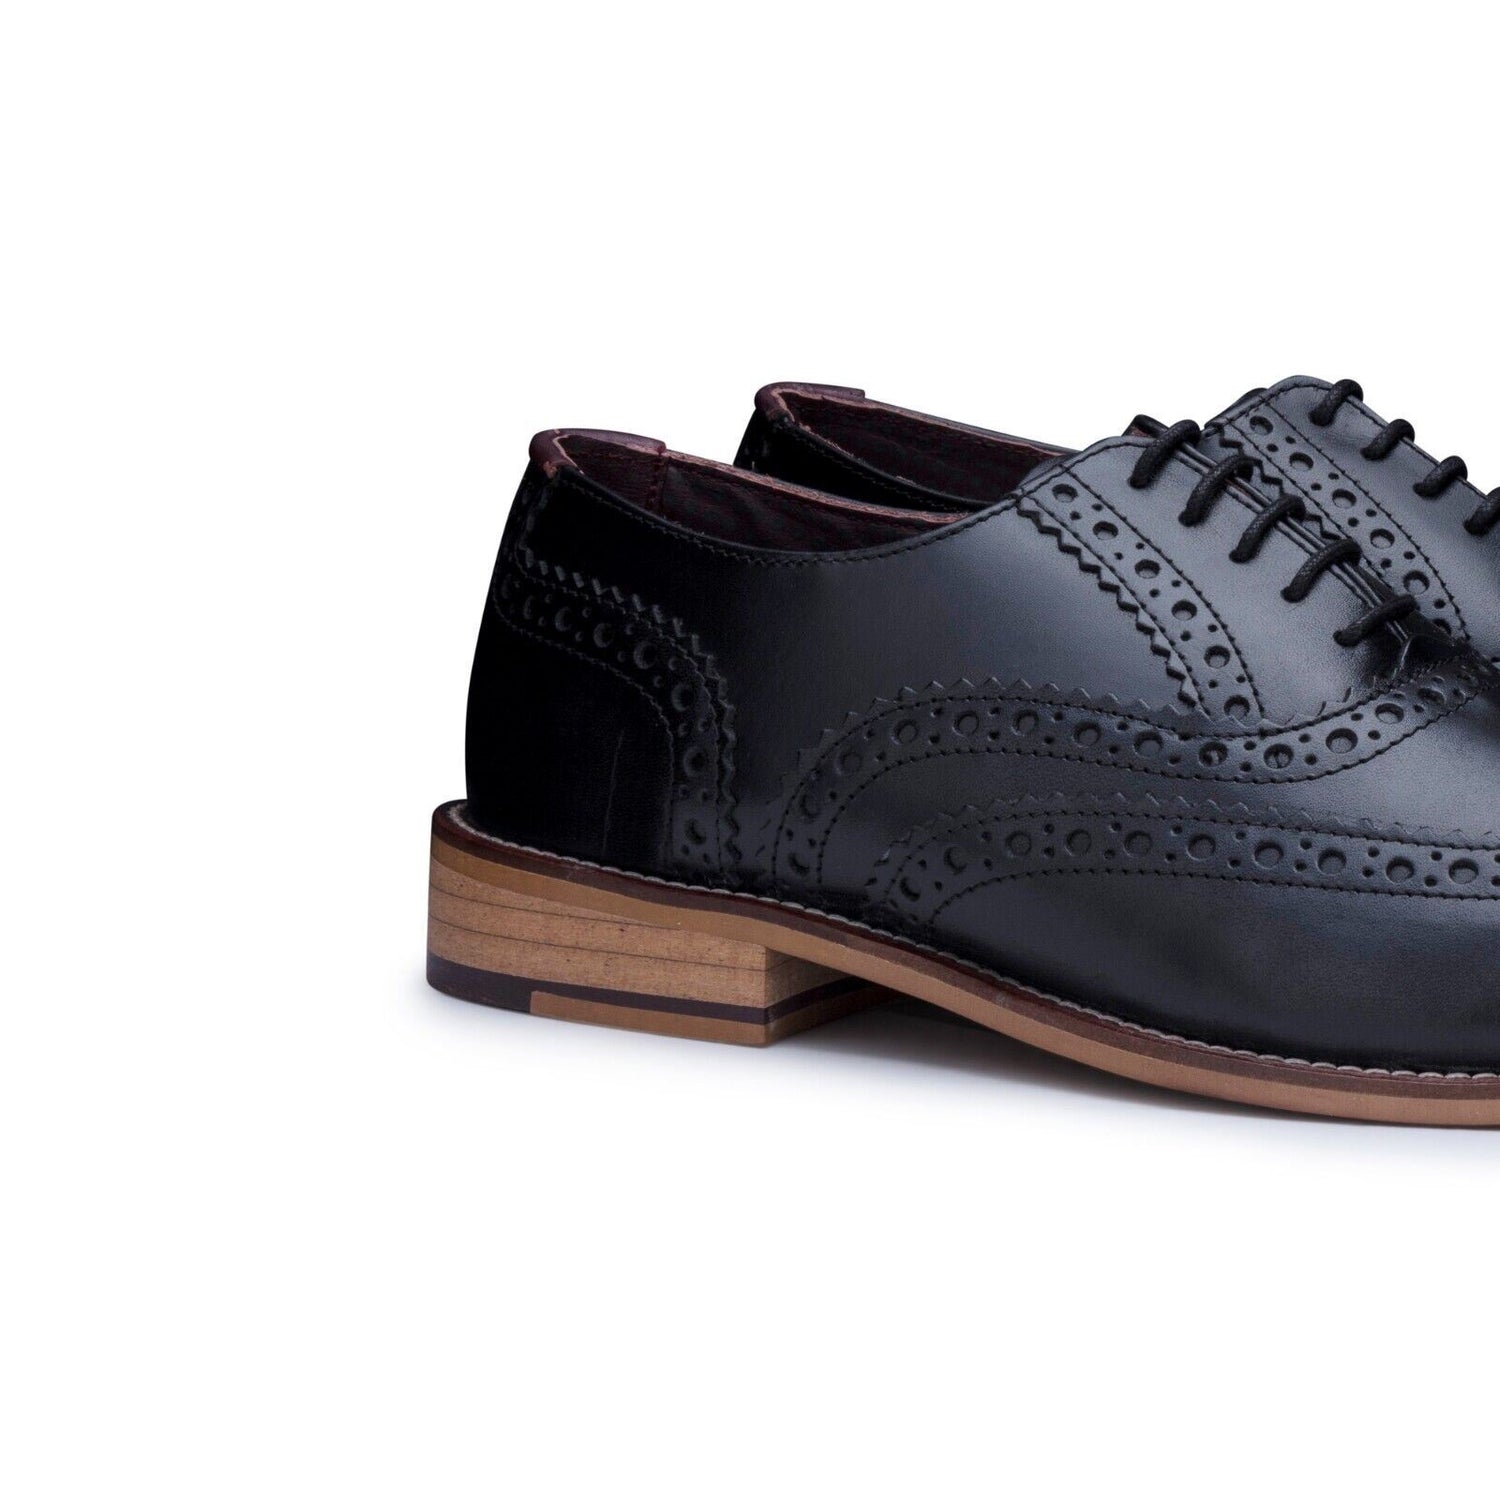 Mens Classic Oxford Black Leather Gatsby Brogue Shoes - Upperclass Fashions 